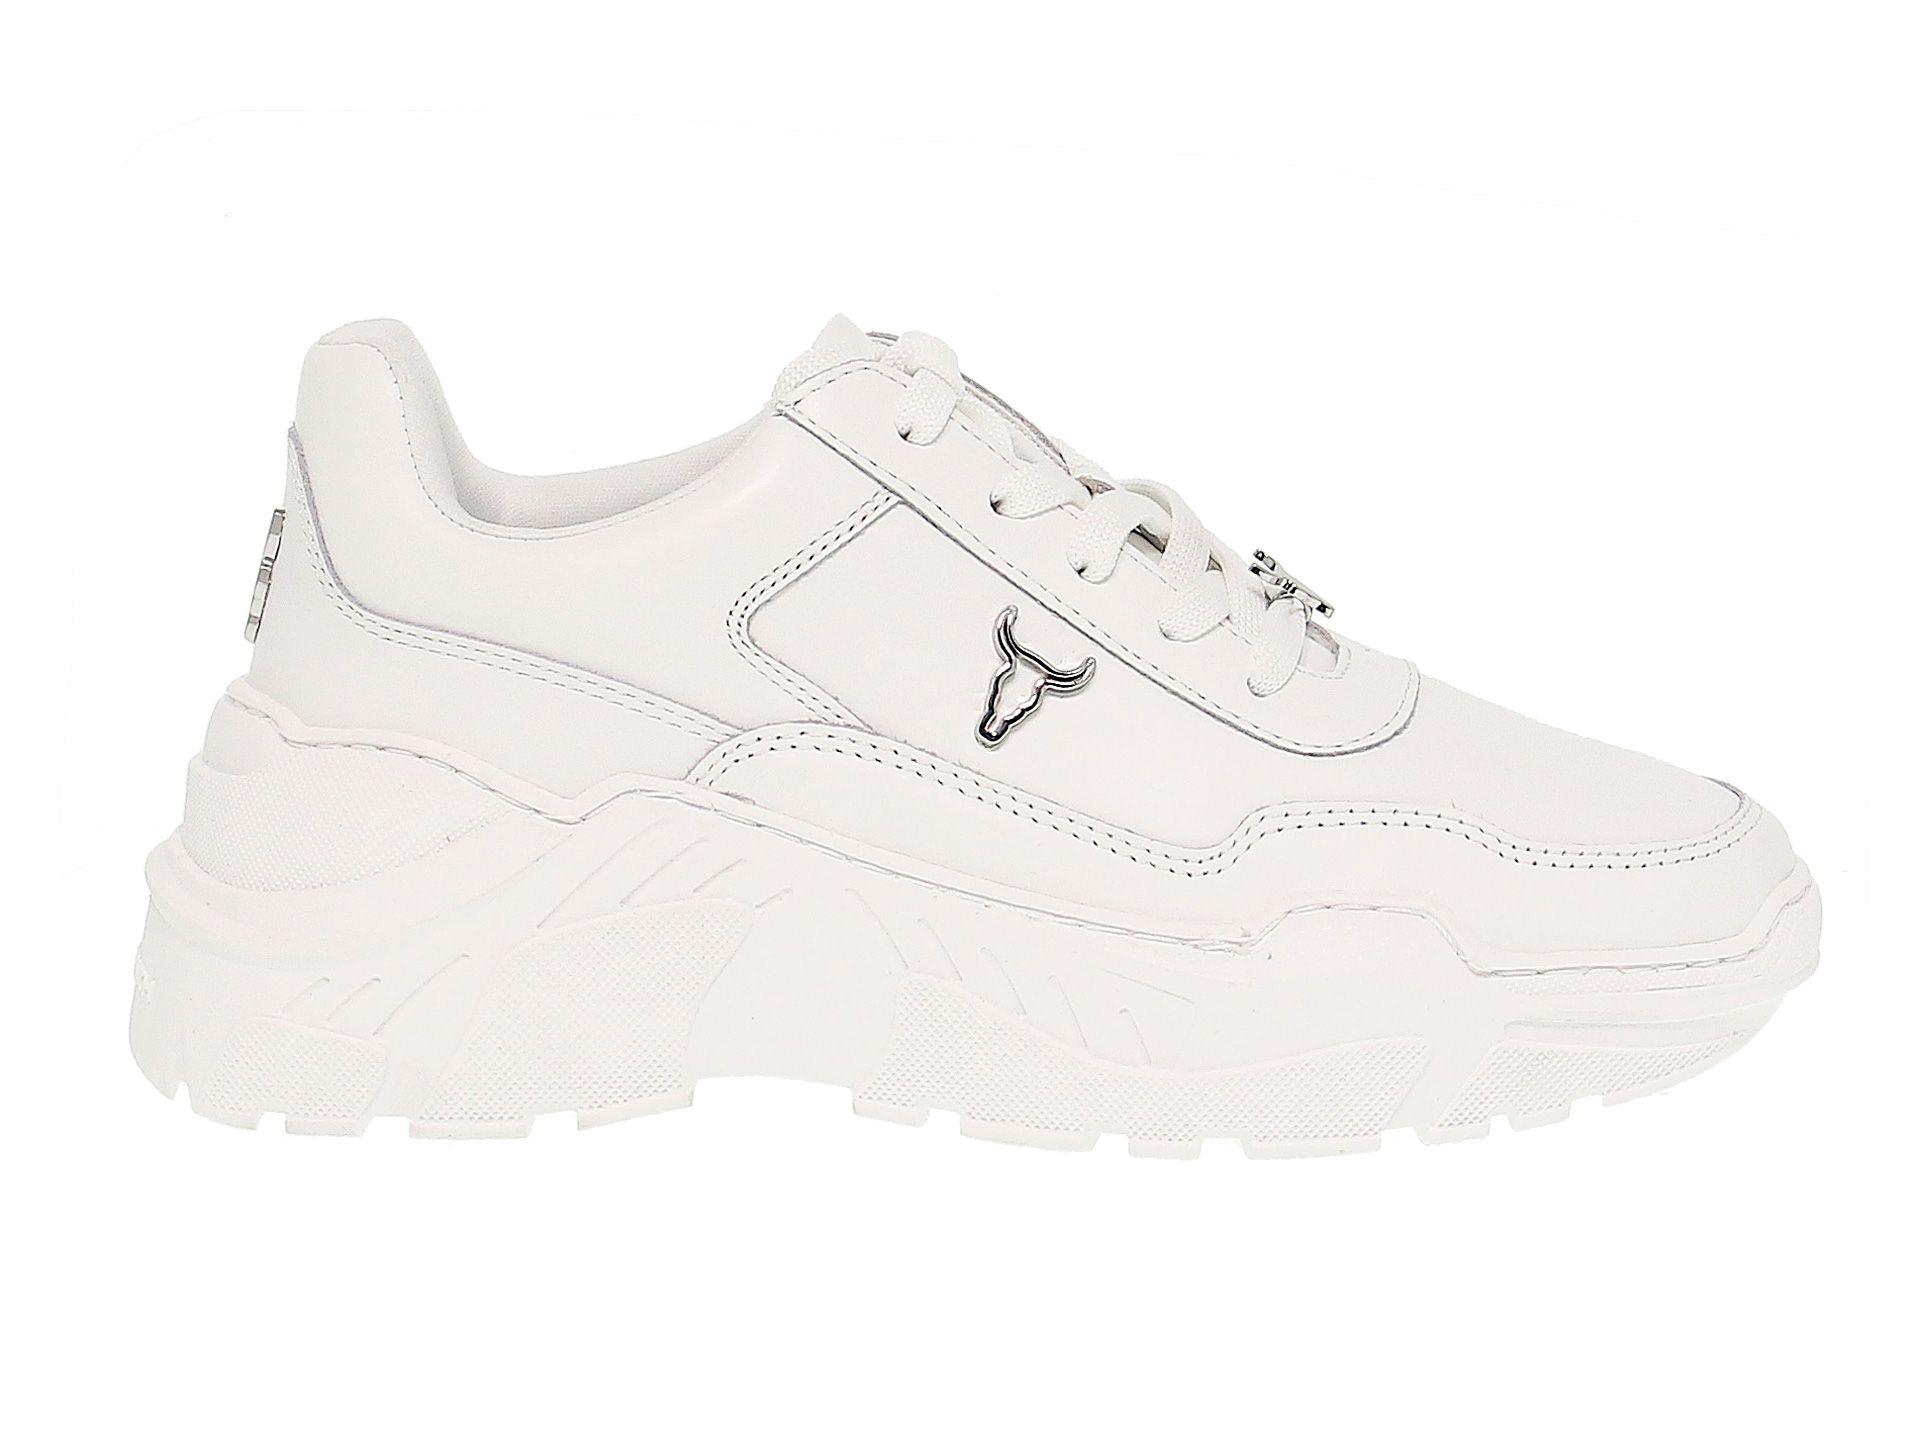 Windsor Smith White Leather Sneakers - Lyst